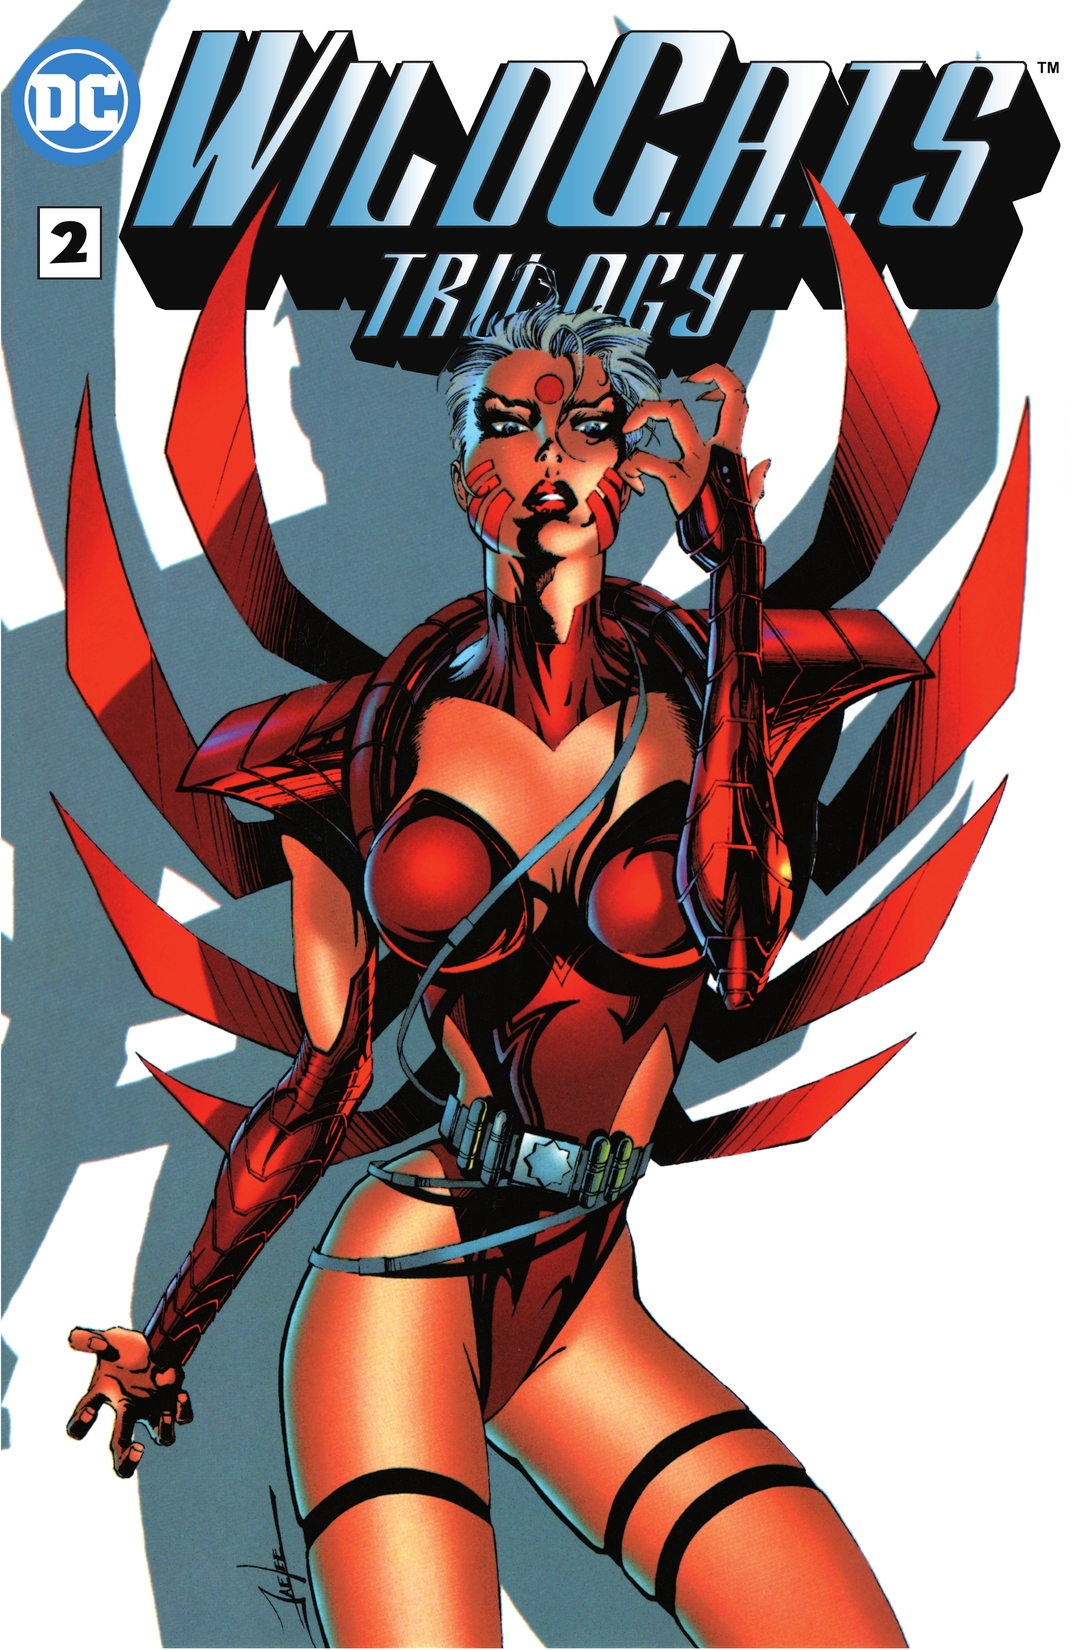 WildC.A.Ts: Covert Action Teams #2 preview images